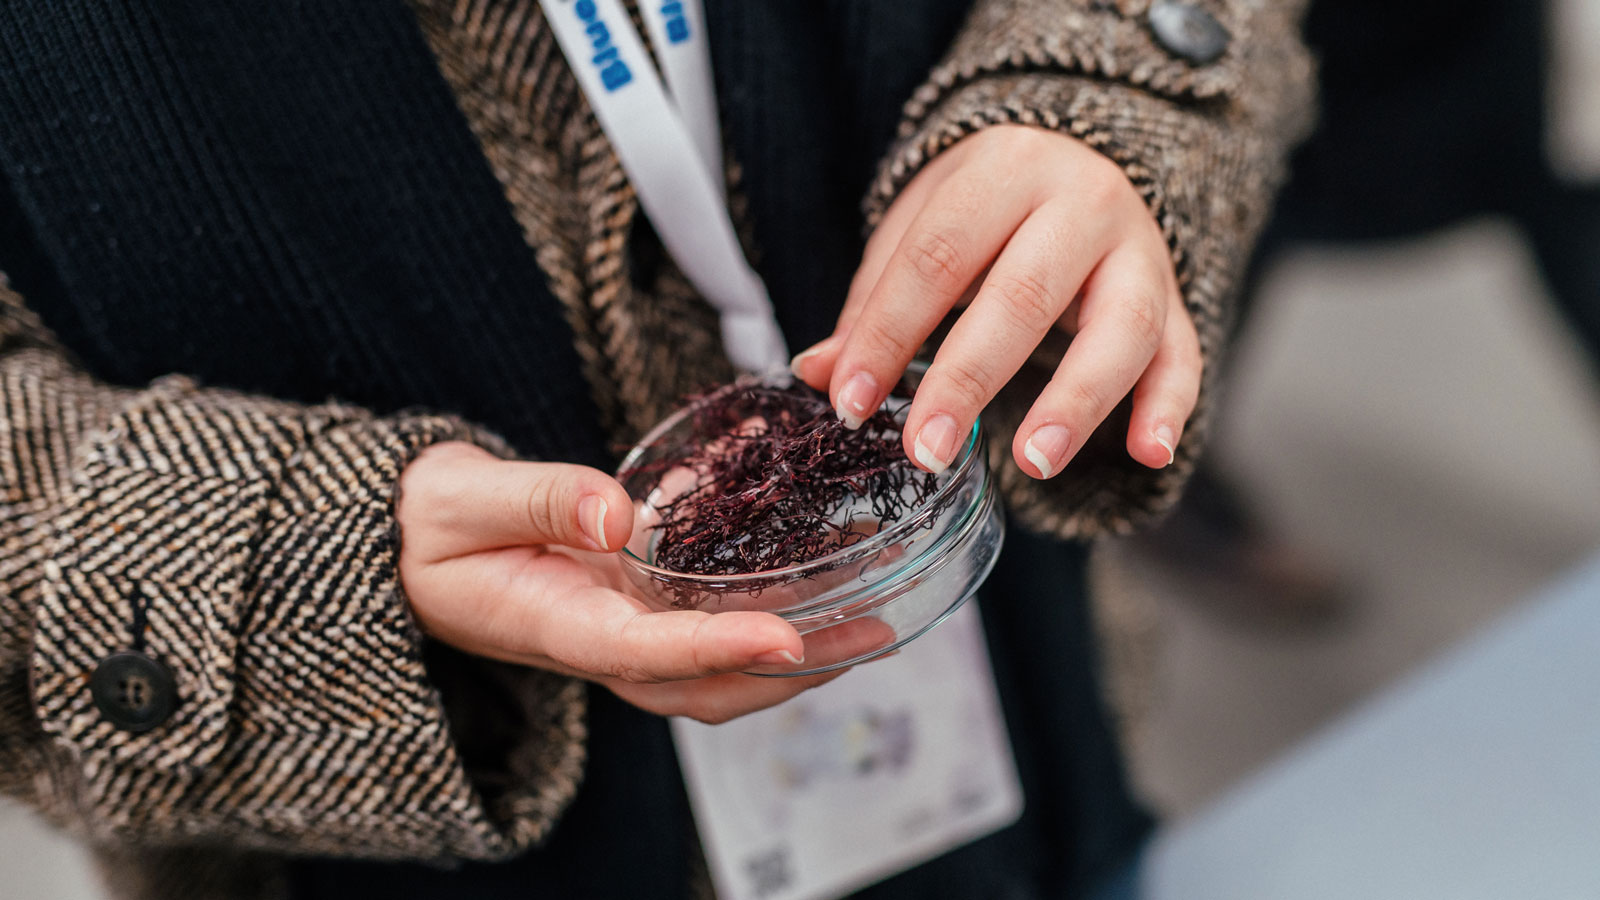 Participant holds a petri dish with a brown algae sample, during a field trip